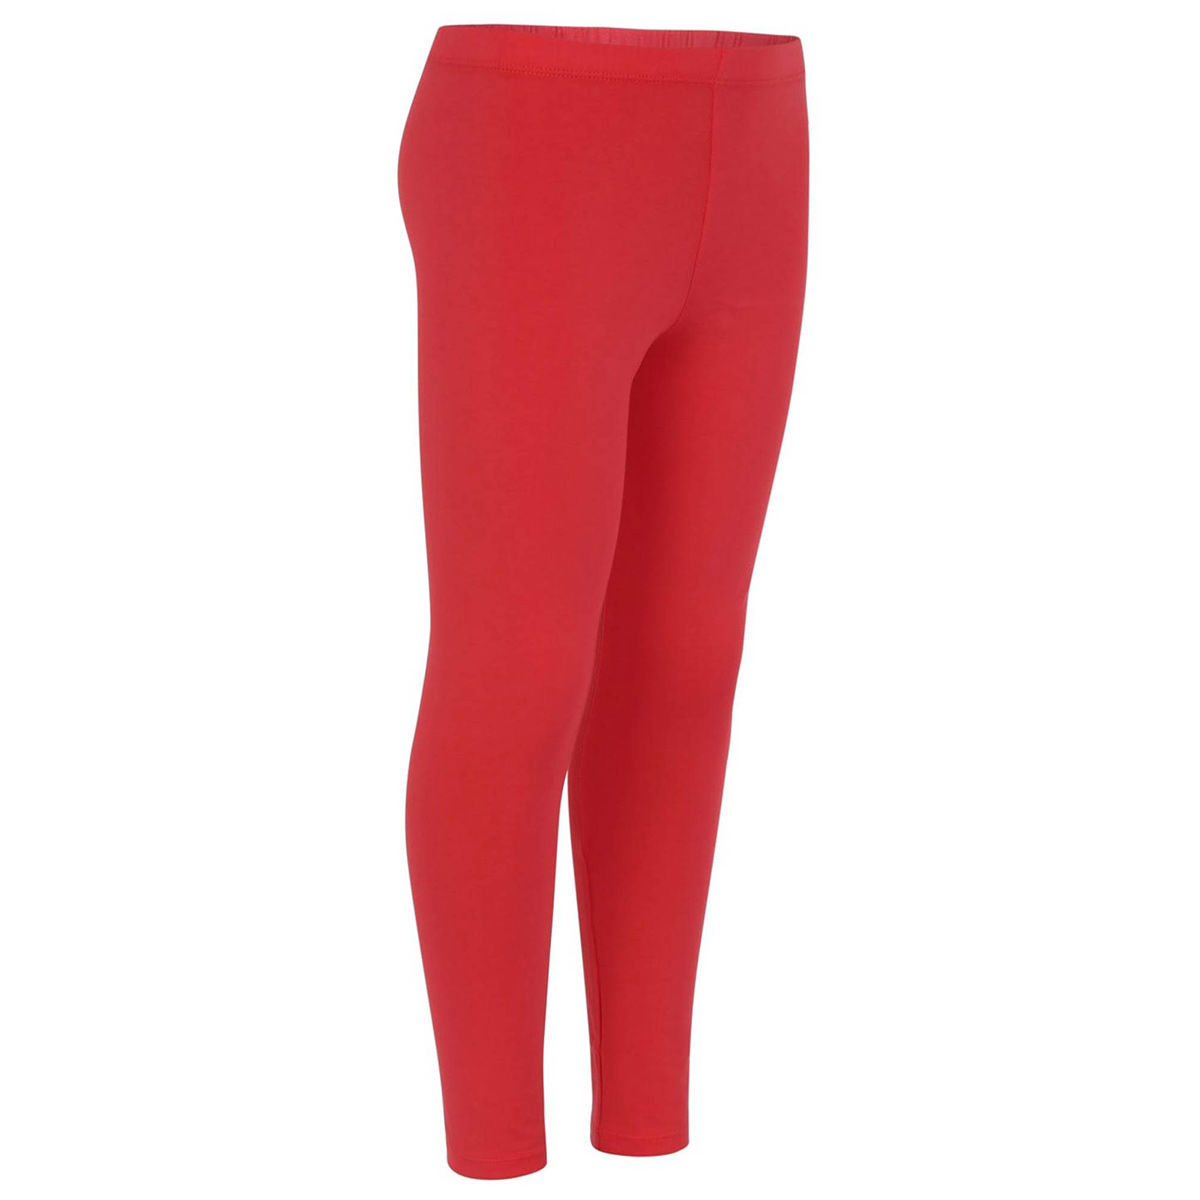 Buy RED Track Pants for Boys by Juniors by Lifestyle Online  Ajiocom